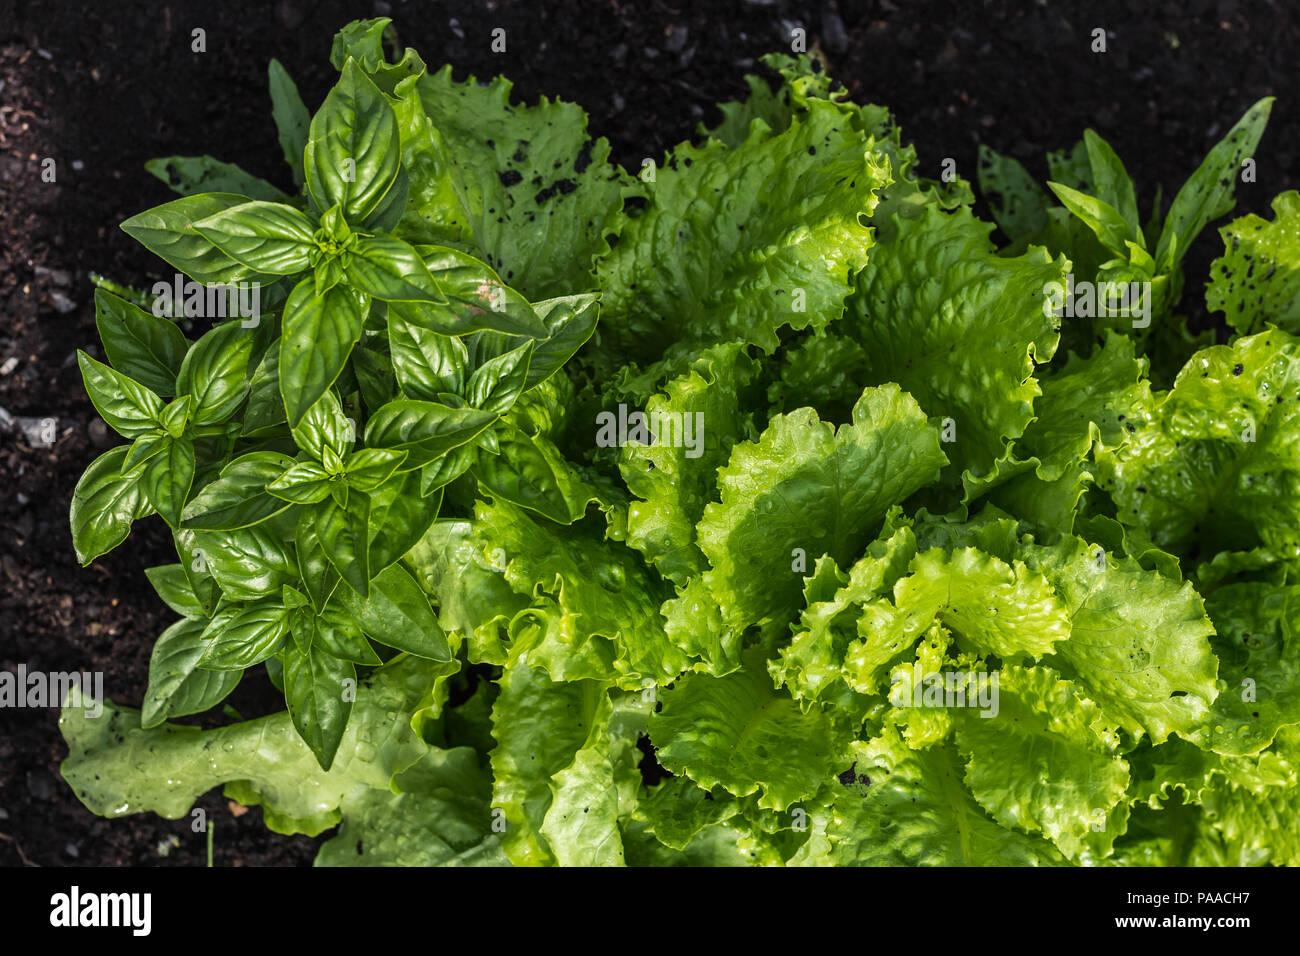 Salad and basil are grown in the garden. Fresh greens after rain. Luxury greenery Stock Photo